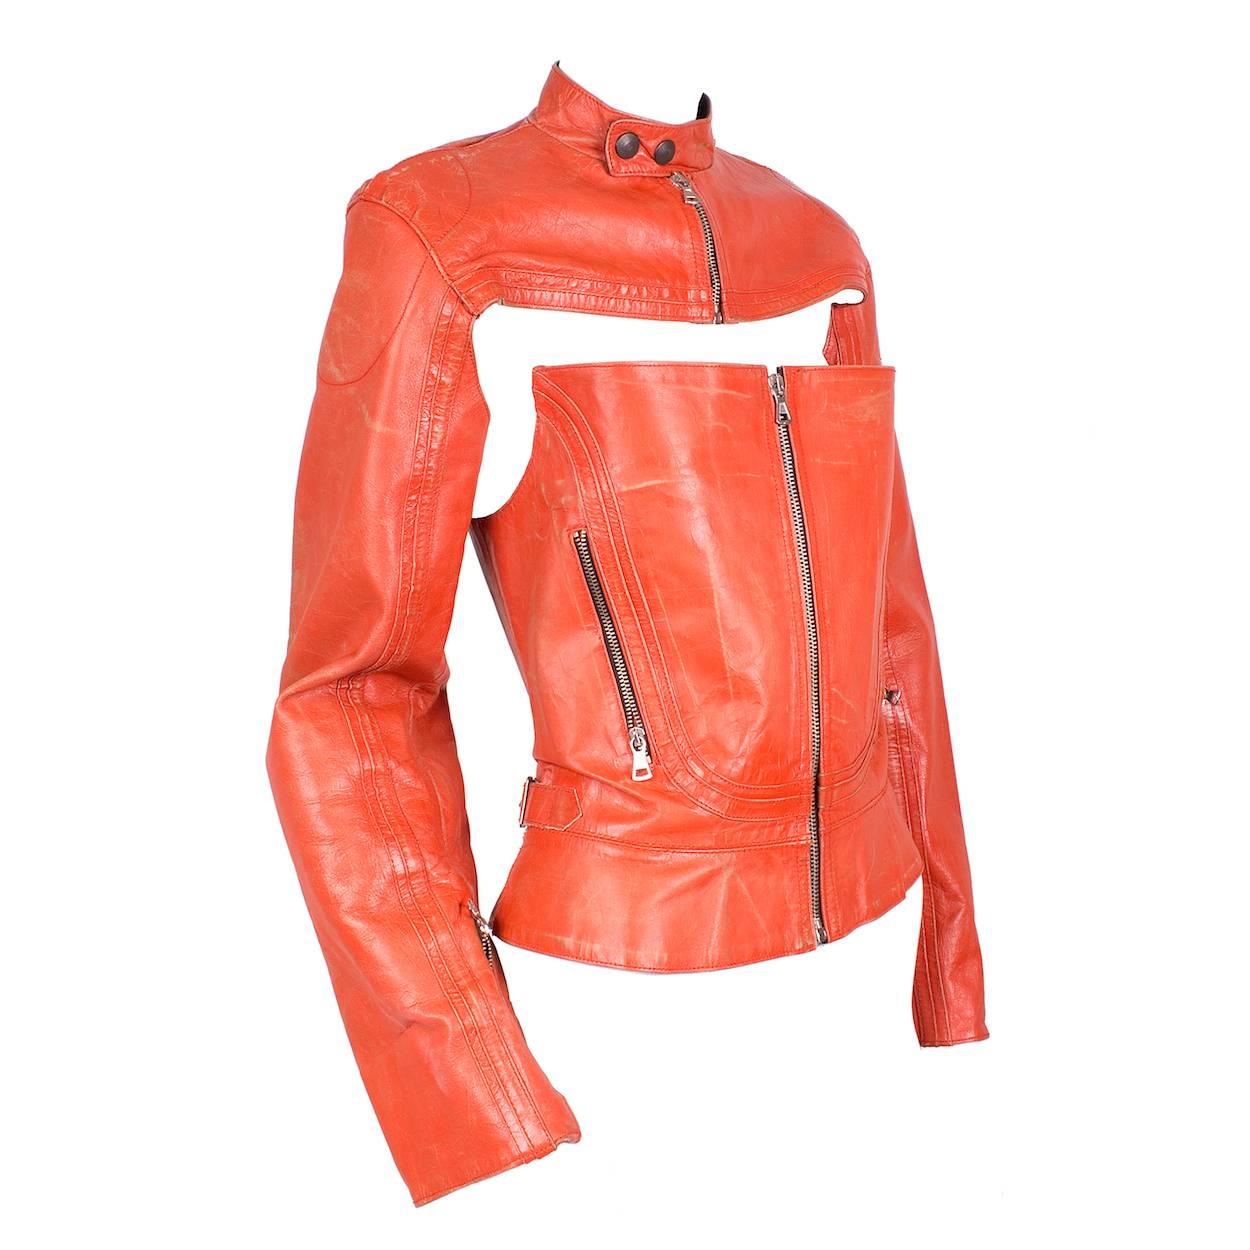 This is a leather corset and sleeves set by Jean Paul Gaultier c. 1990s.  It features a zipper down the front for both pieces and resembles a leather motorcycle jacket when worn together.  

Sleeves:
17